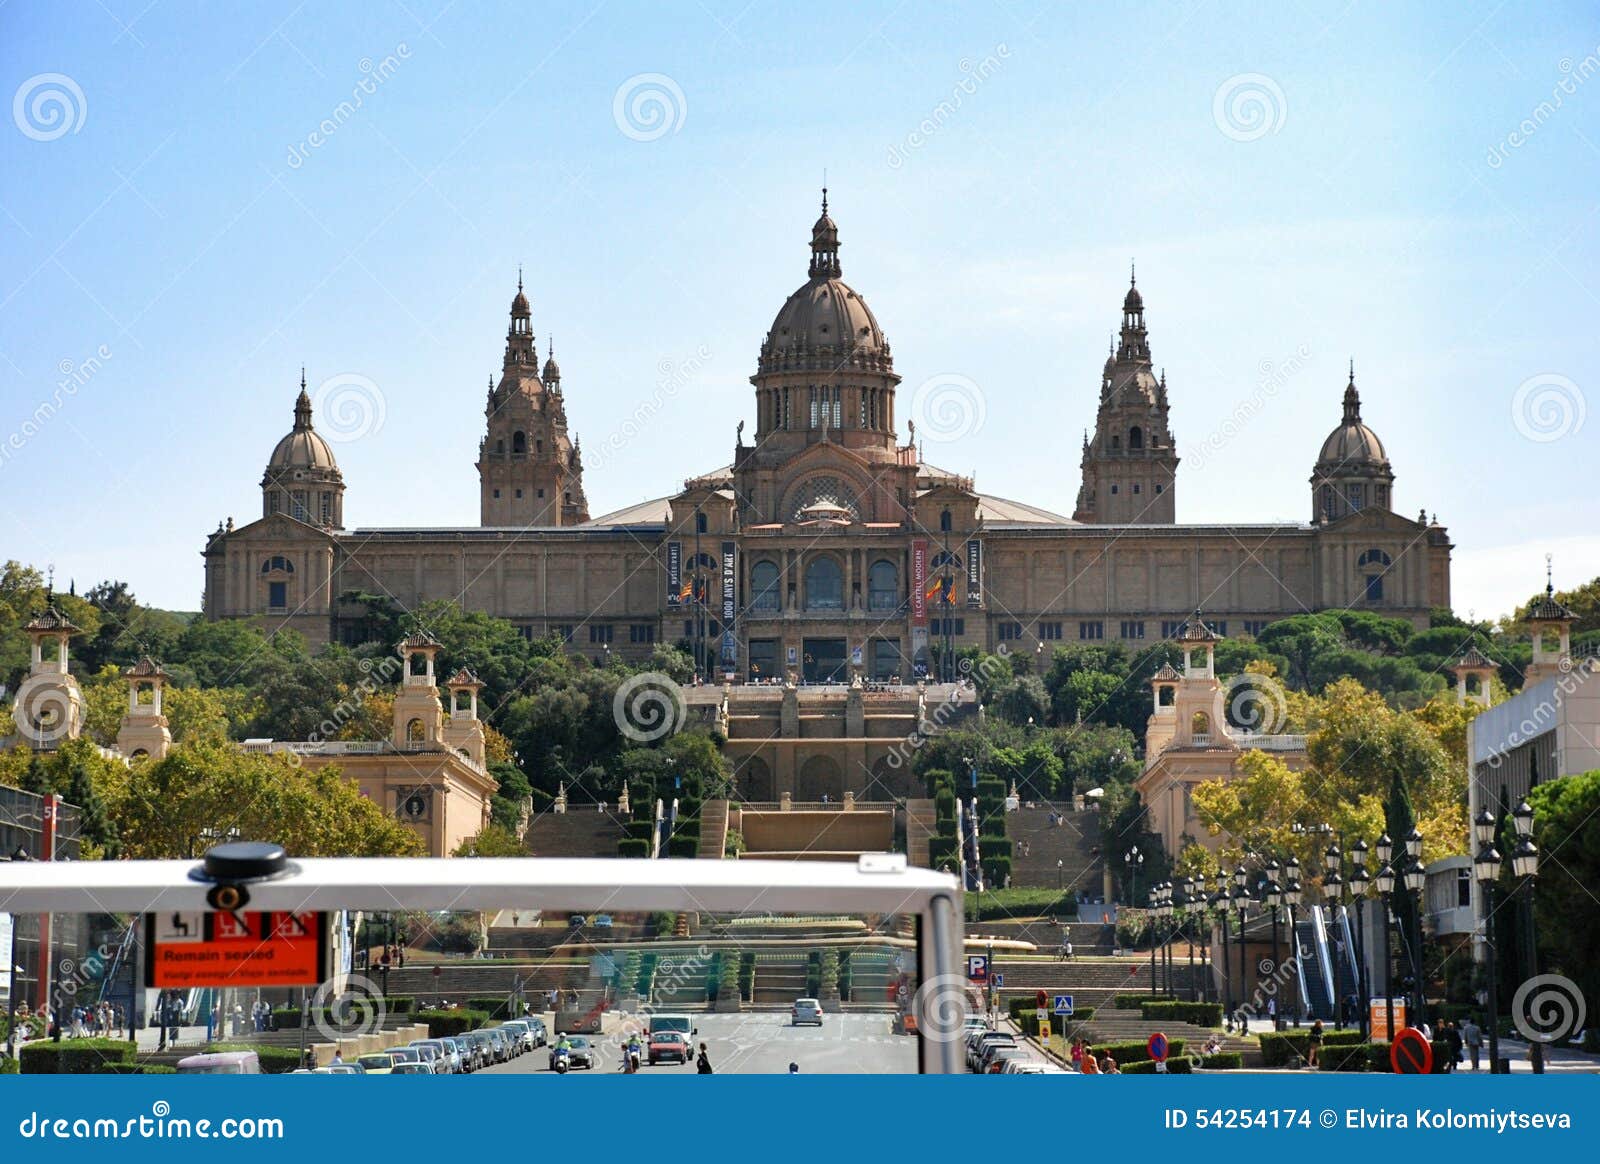 national museum of art of catalonia mnac, barcelona spain